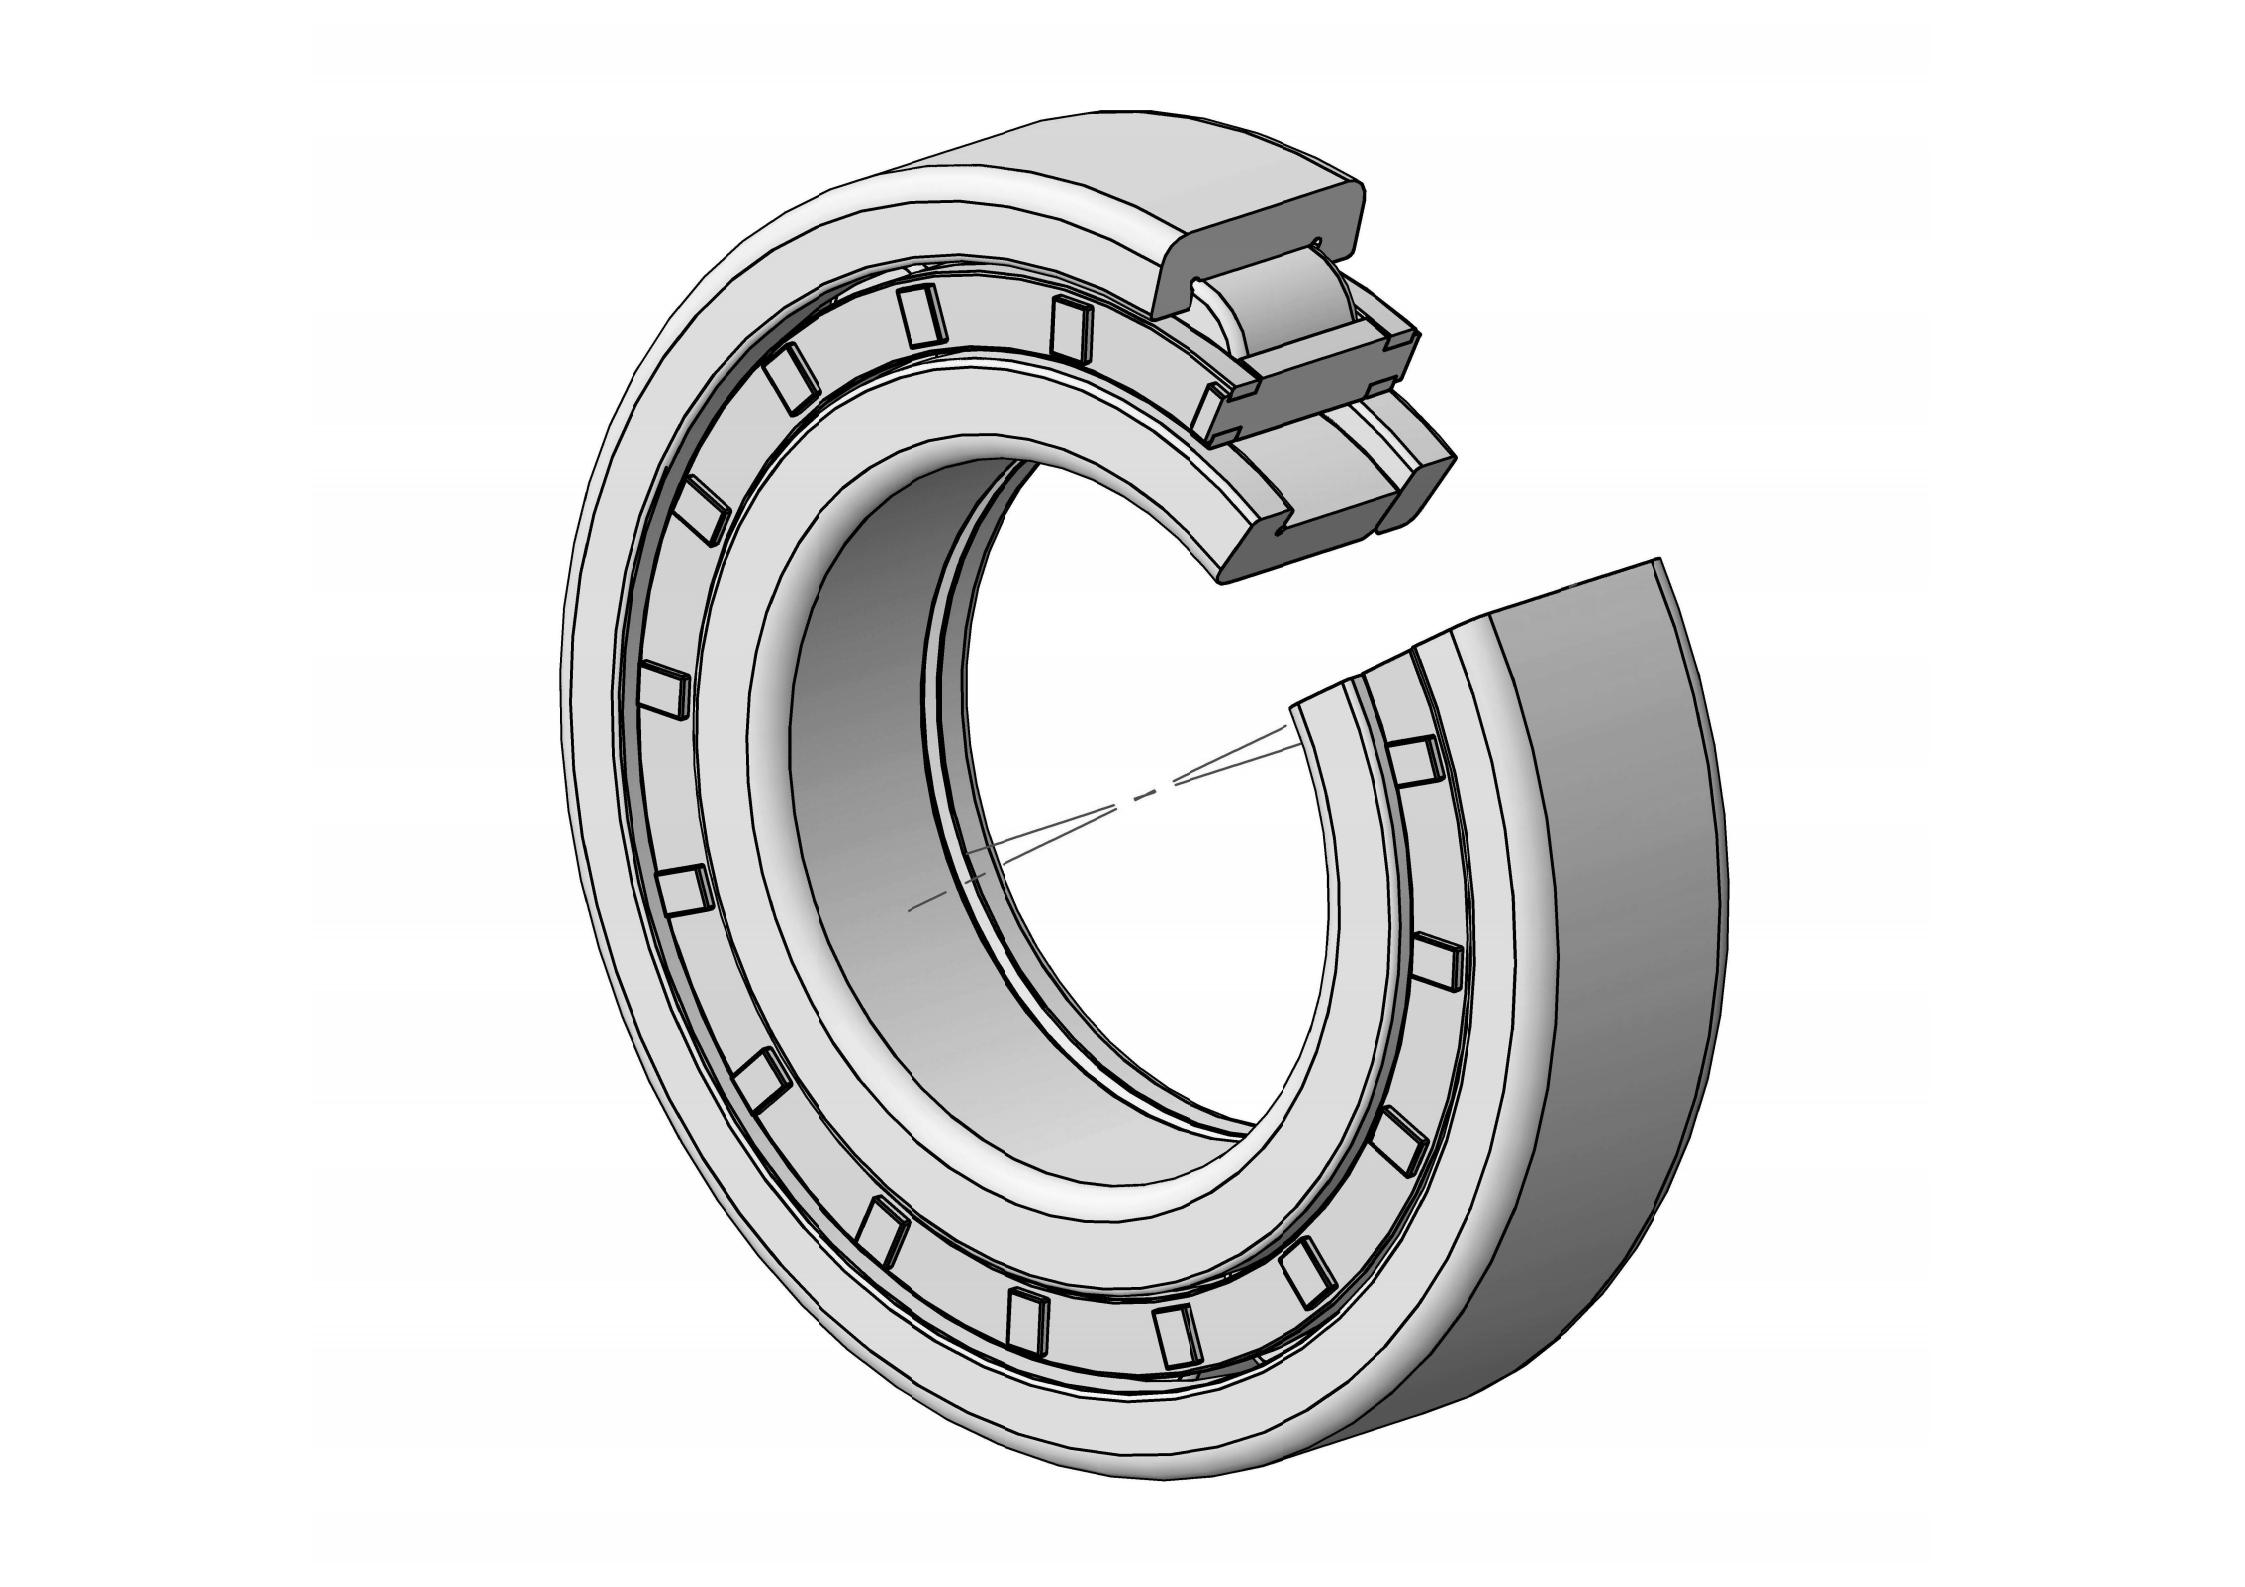 NUP322-EM Single Row Cylindrical roller bearing 